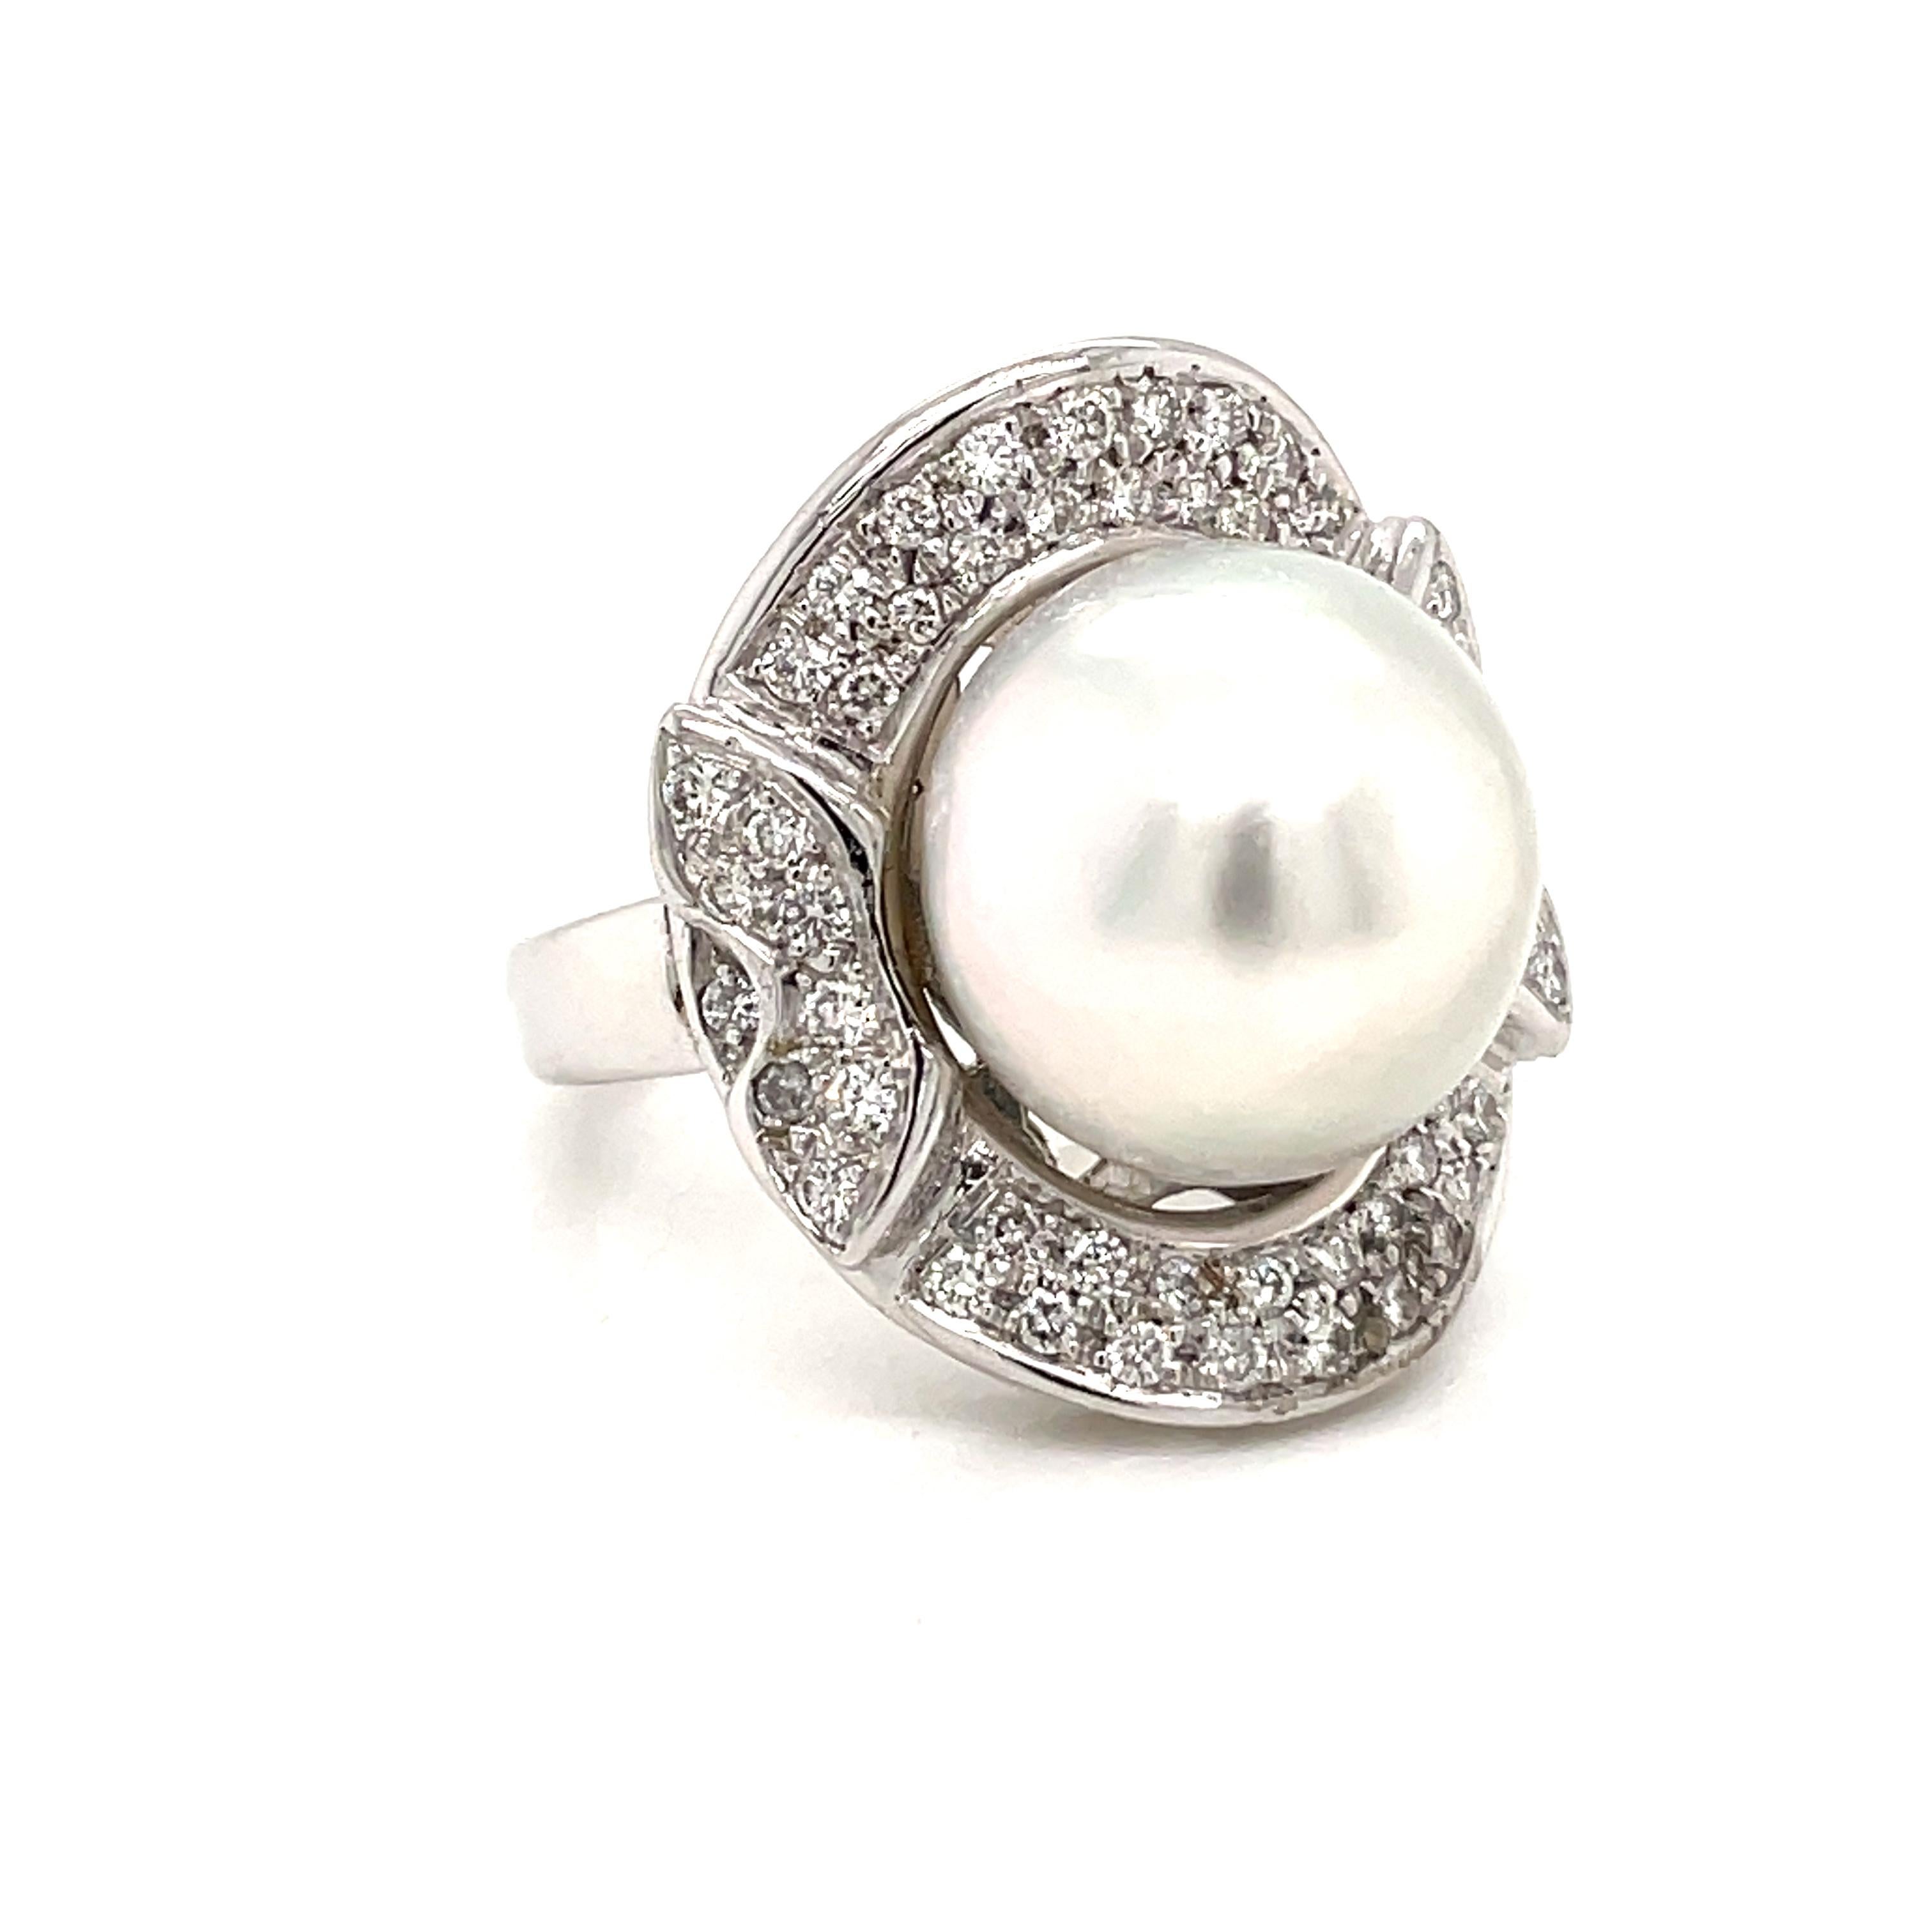 A magnificent 18k white Gold ring set with a South Sea Pearl 13mm and Sparkling round brilliant cut Diamonds 1.25 cts. G Color Vvs Clarity 
Circa 1970 

CONDITION: Pre-owned - Excellent 
METAL: 18k Gold 
GEM STONE: Diamonds - Pearl
WEIGHT: 14.70